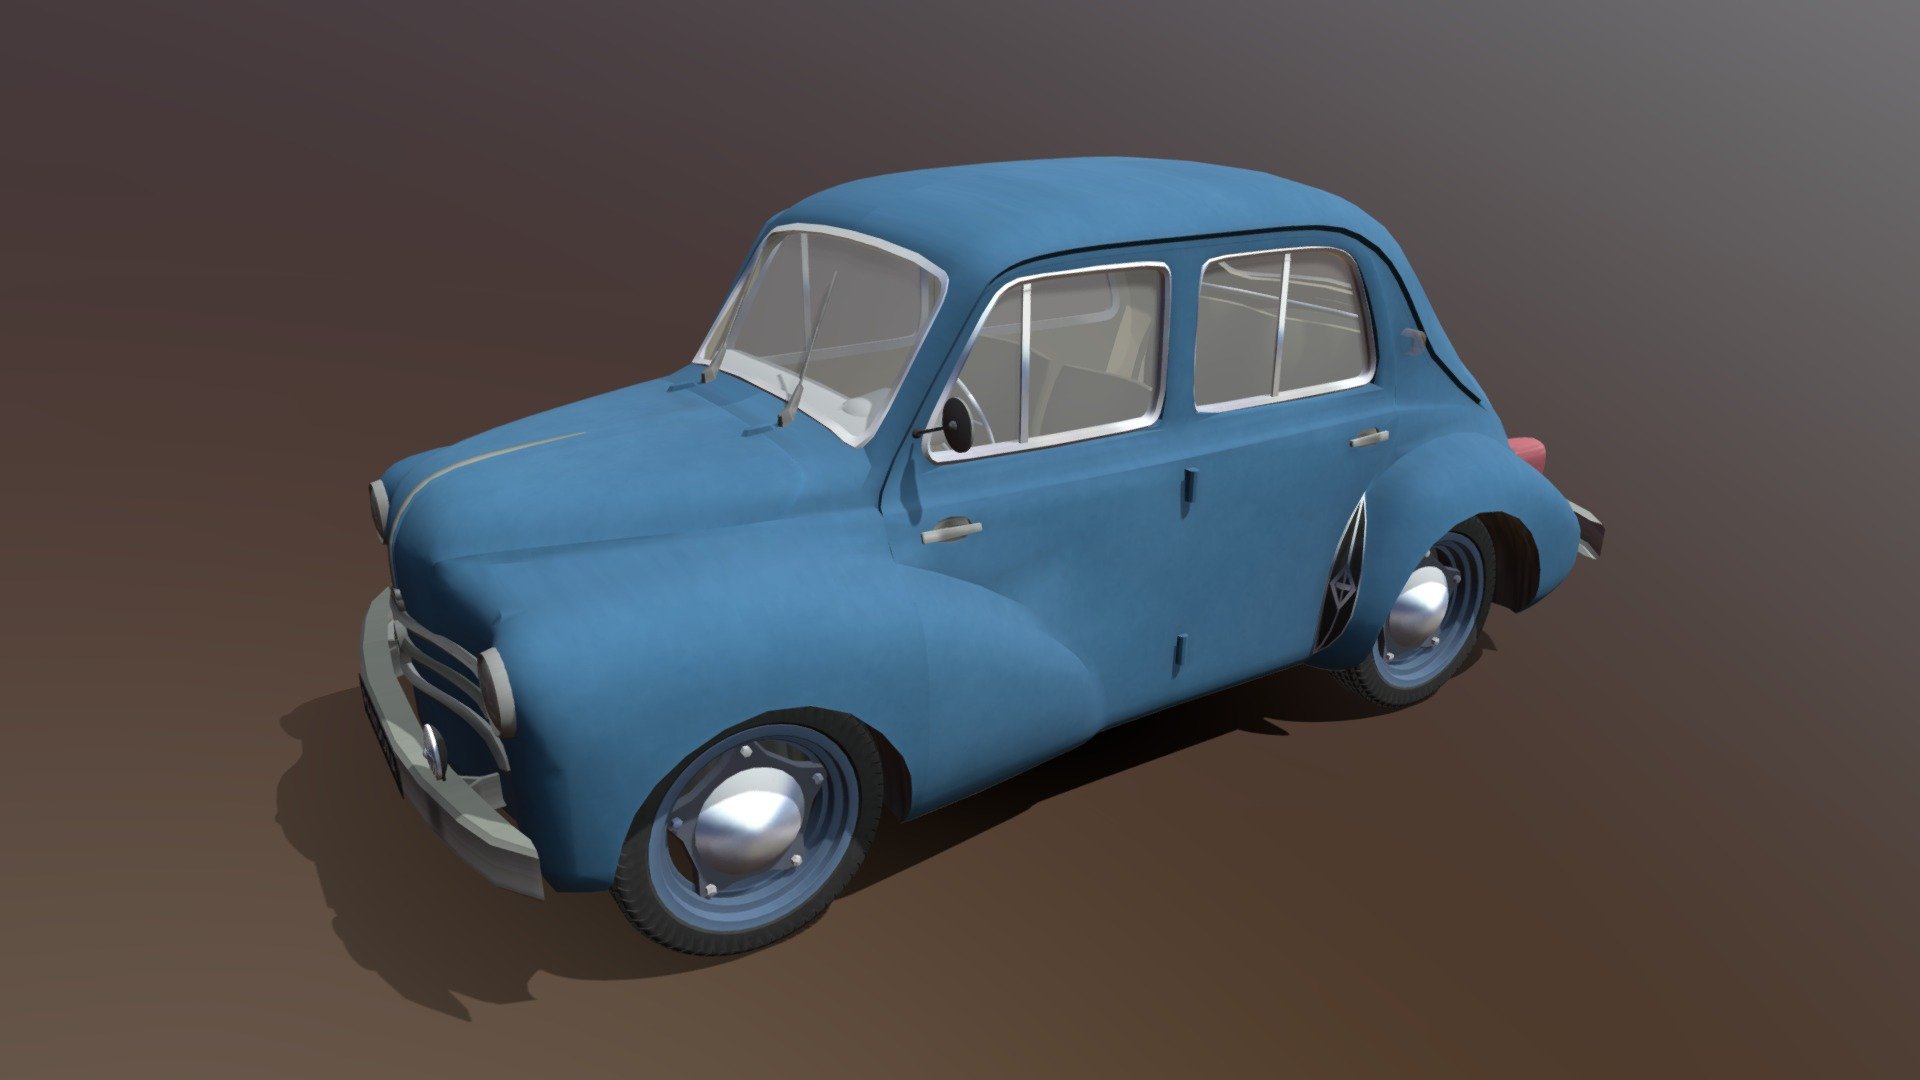 The Renault 4CV (French: quatre chevaux, pronounced [kat.ʃəvo] as if spelled quat'chevaux) is a car produced by the French company Renault from August 1947 through July 1961. It is a four-door economy car with its engine mounted in the rear and driving the rear wheels. It was the first French car to sell over a million units, and was superseded by the Dauphine. (Sources Wikipedia) - Renault 4 Cv - Download Free 3D model by helijah 3d model